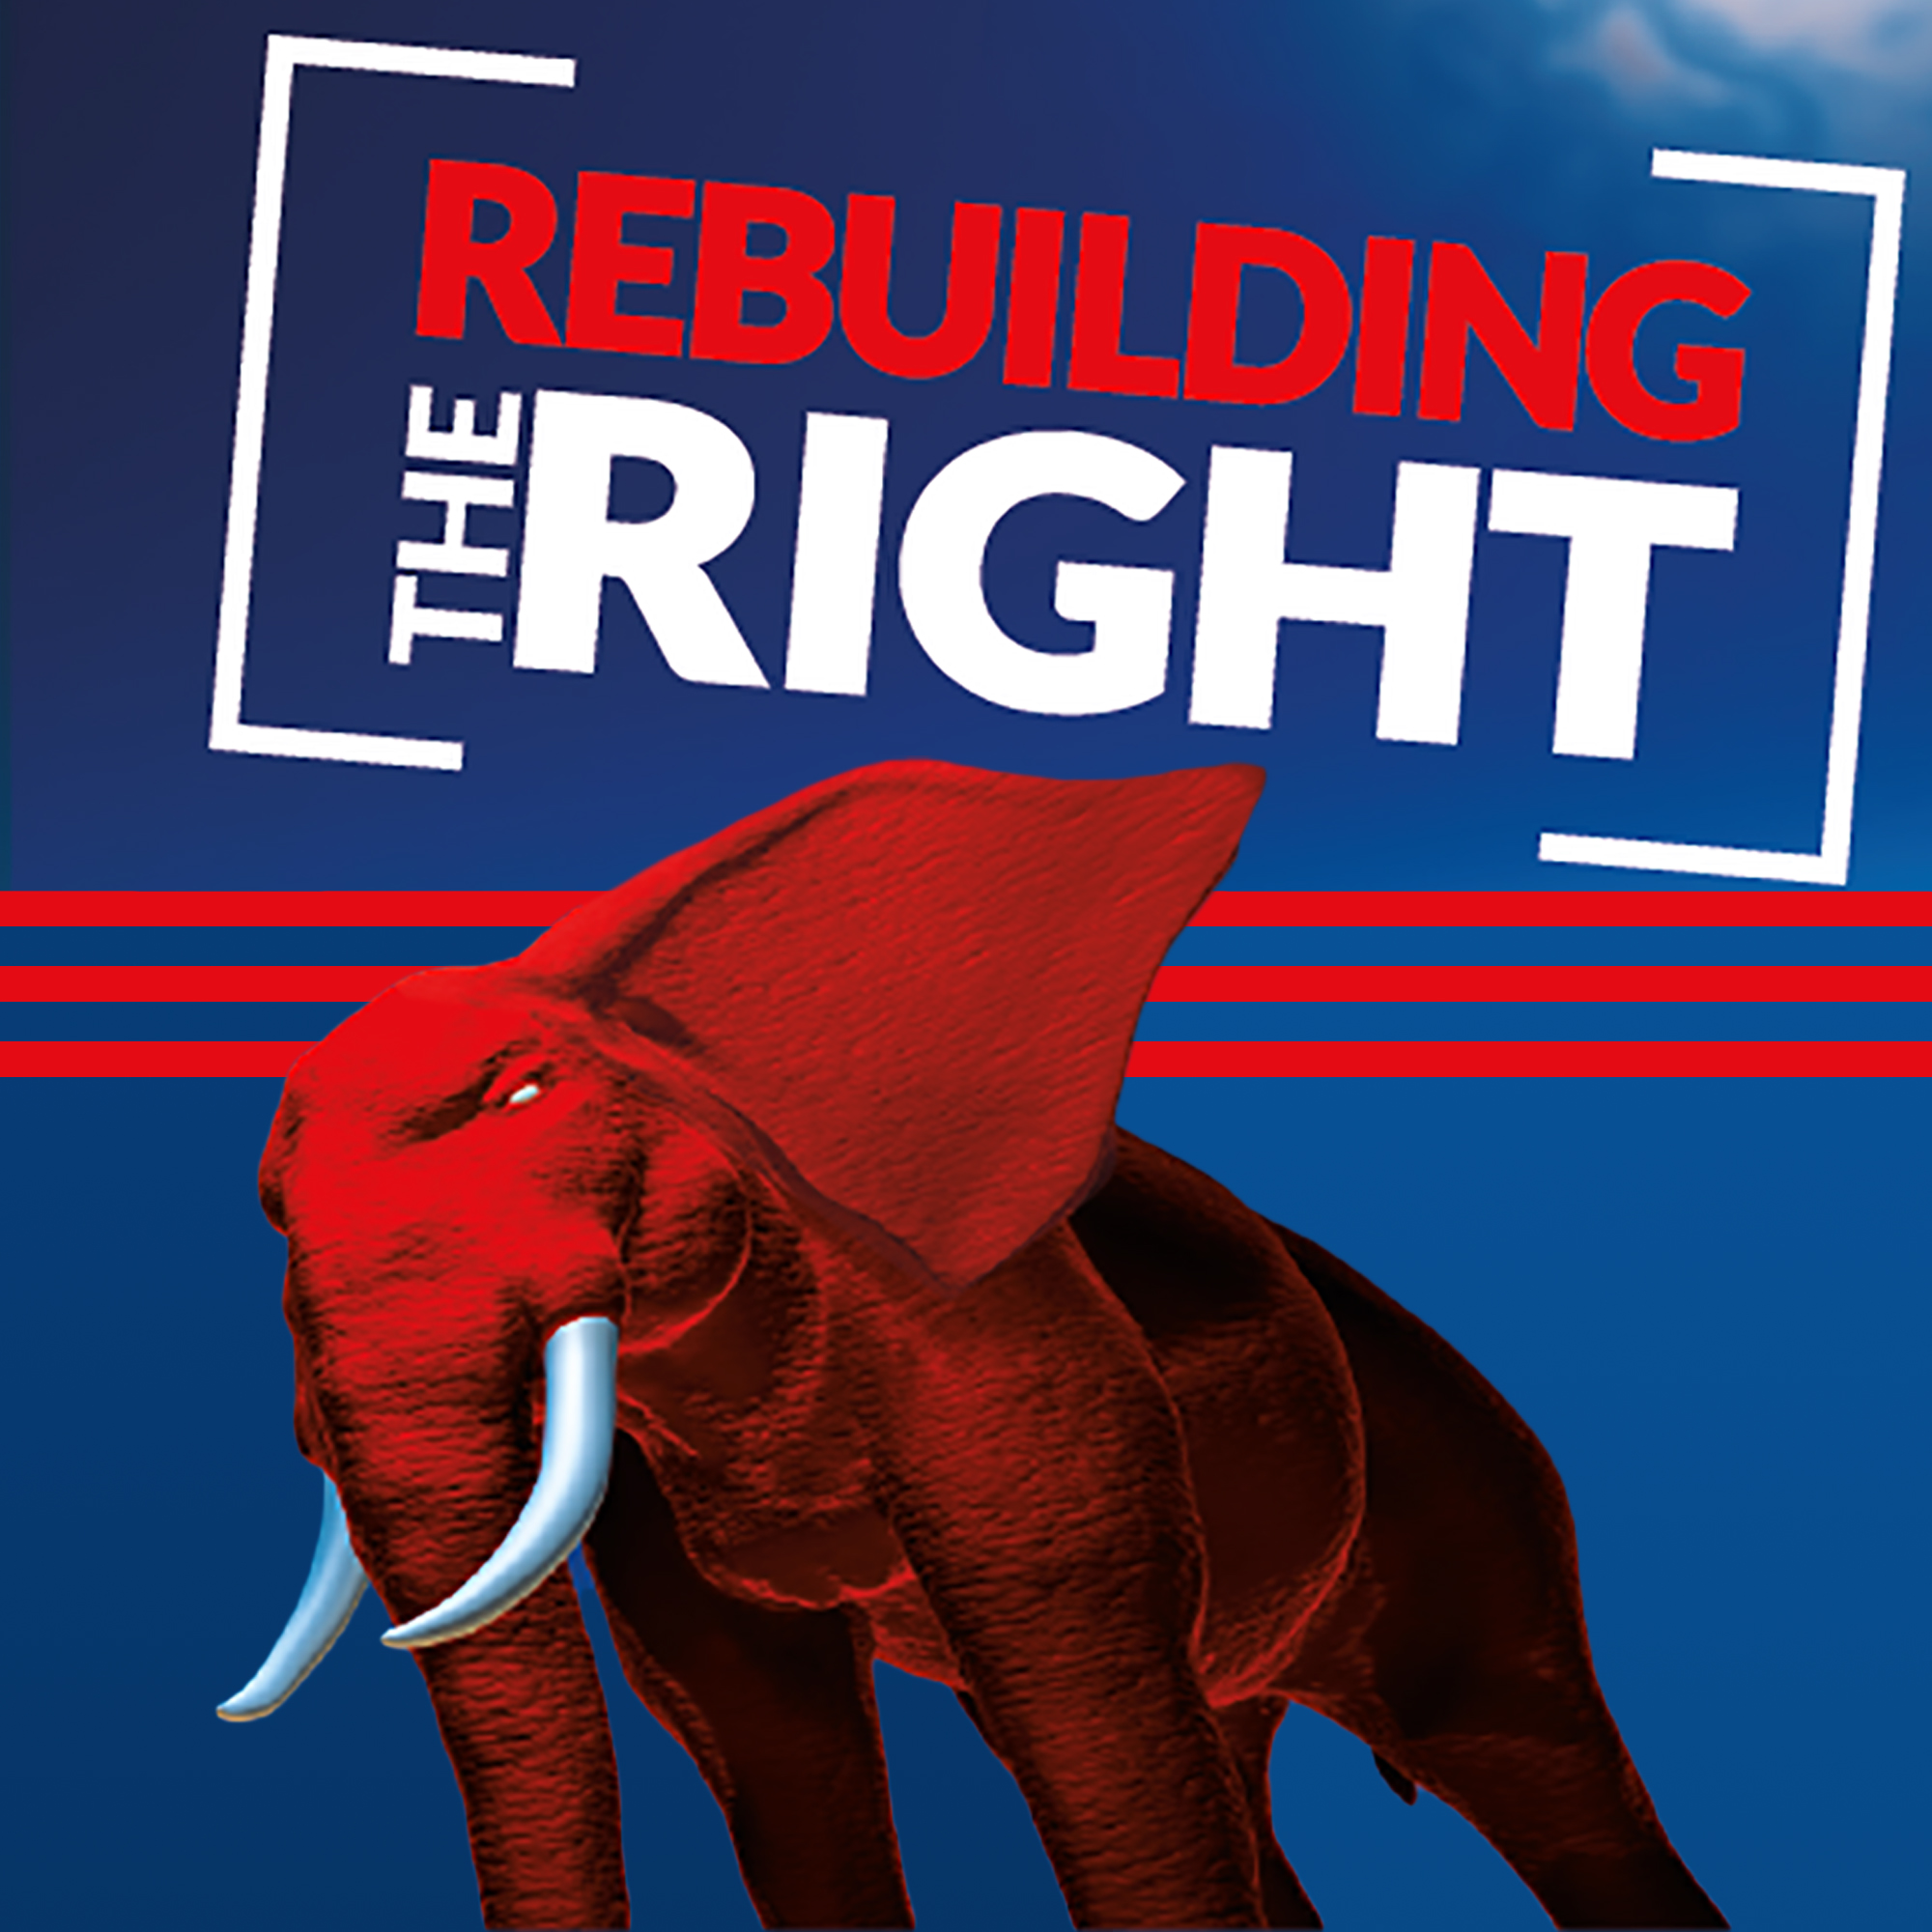 Rebuilding the Right 3-10-21: Chris Stigall and Jennifer Horn